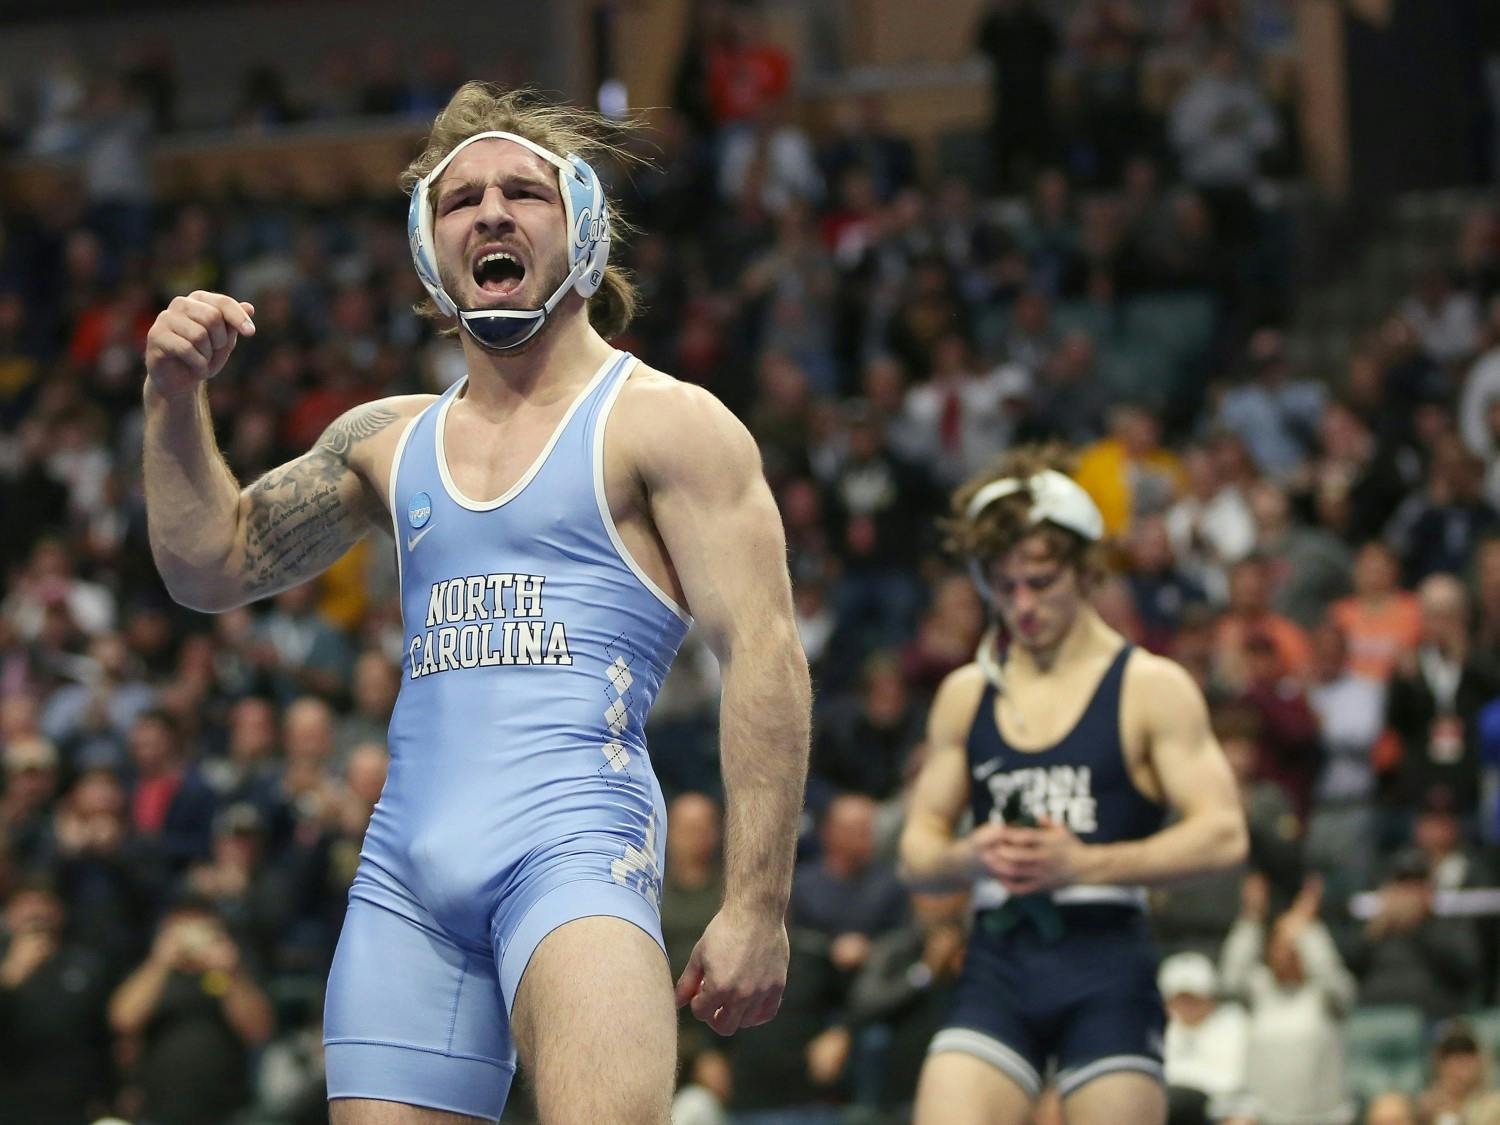 Austin O'Connor celebrates during his 157-pound national championship match against Levi Haines of Penn State. O'Connor defeated Haines 6-2. Photo Courtesy of Dave Crenshaw and UNC Athletic Communications.&nbsp;